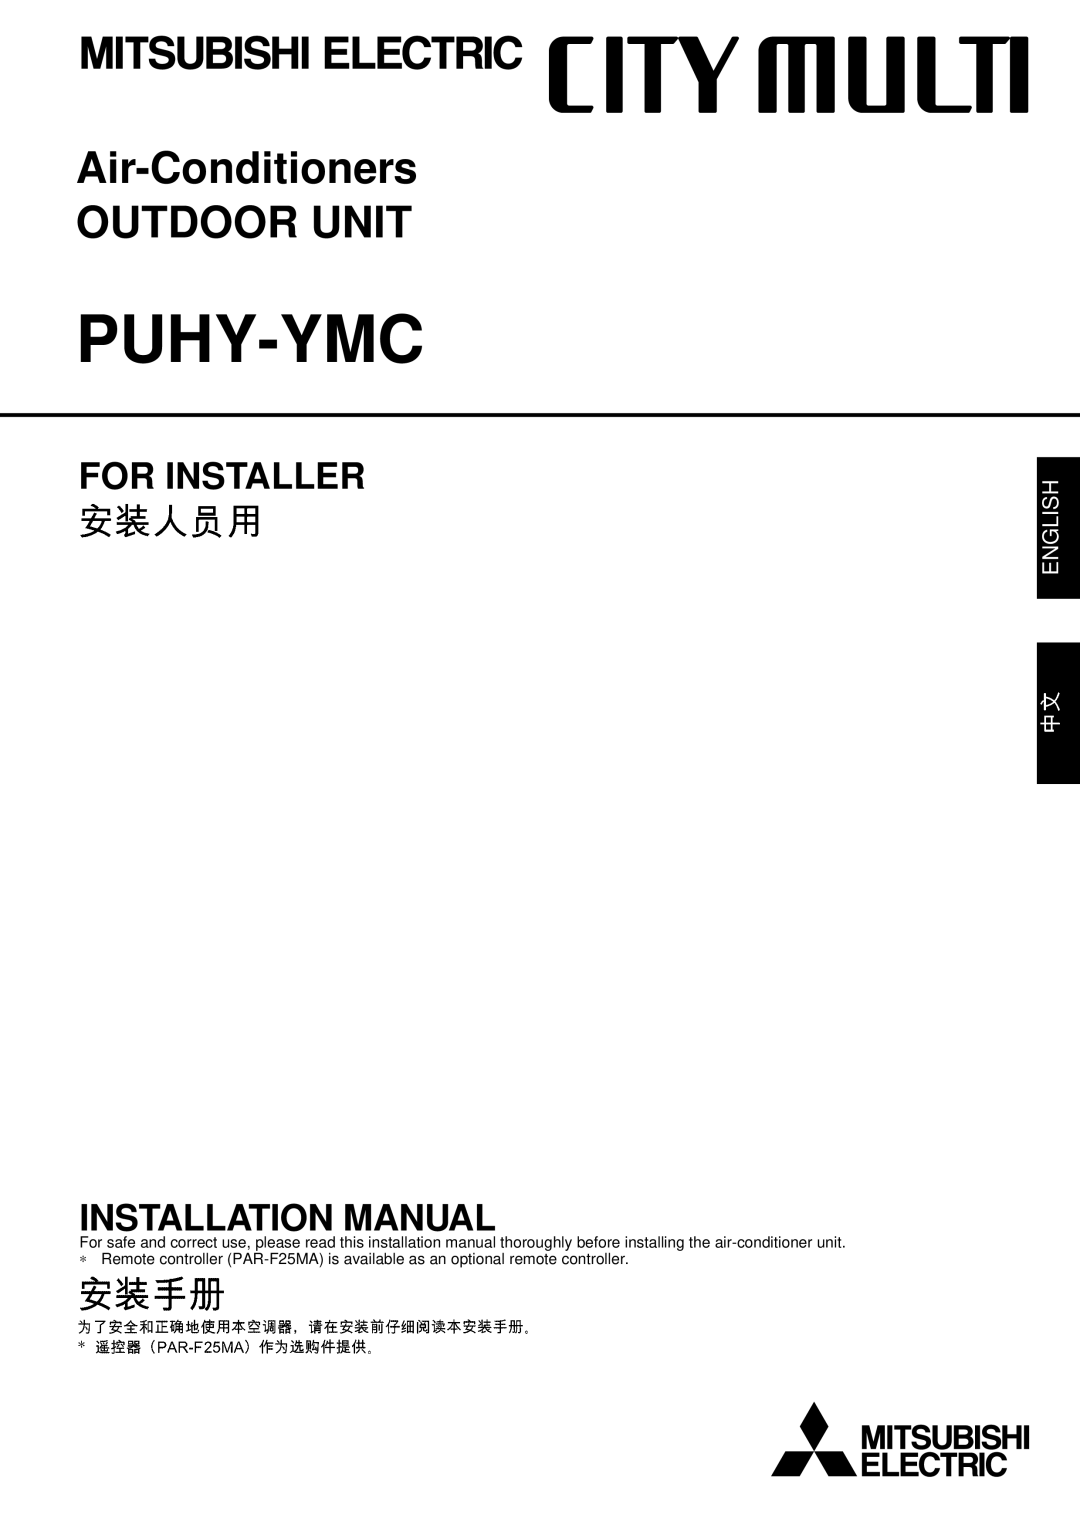 Mitsubishi Electronics PUHY-YMC installation manual English, Puhy-Ymc, Air-Conditioners OUTDOOR UNIT 